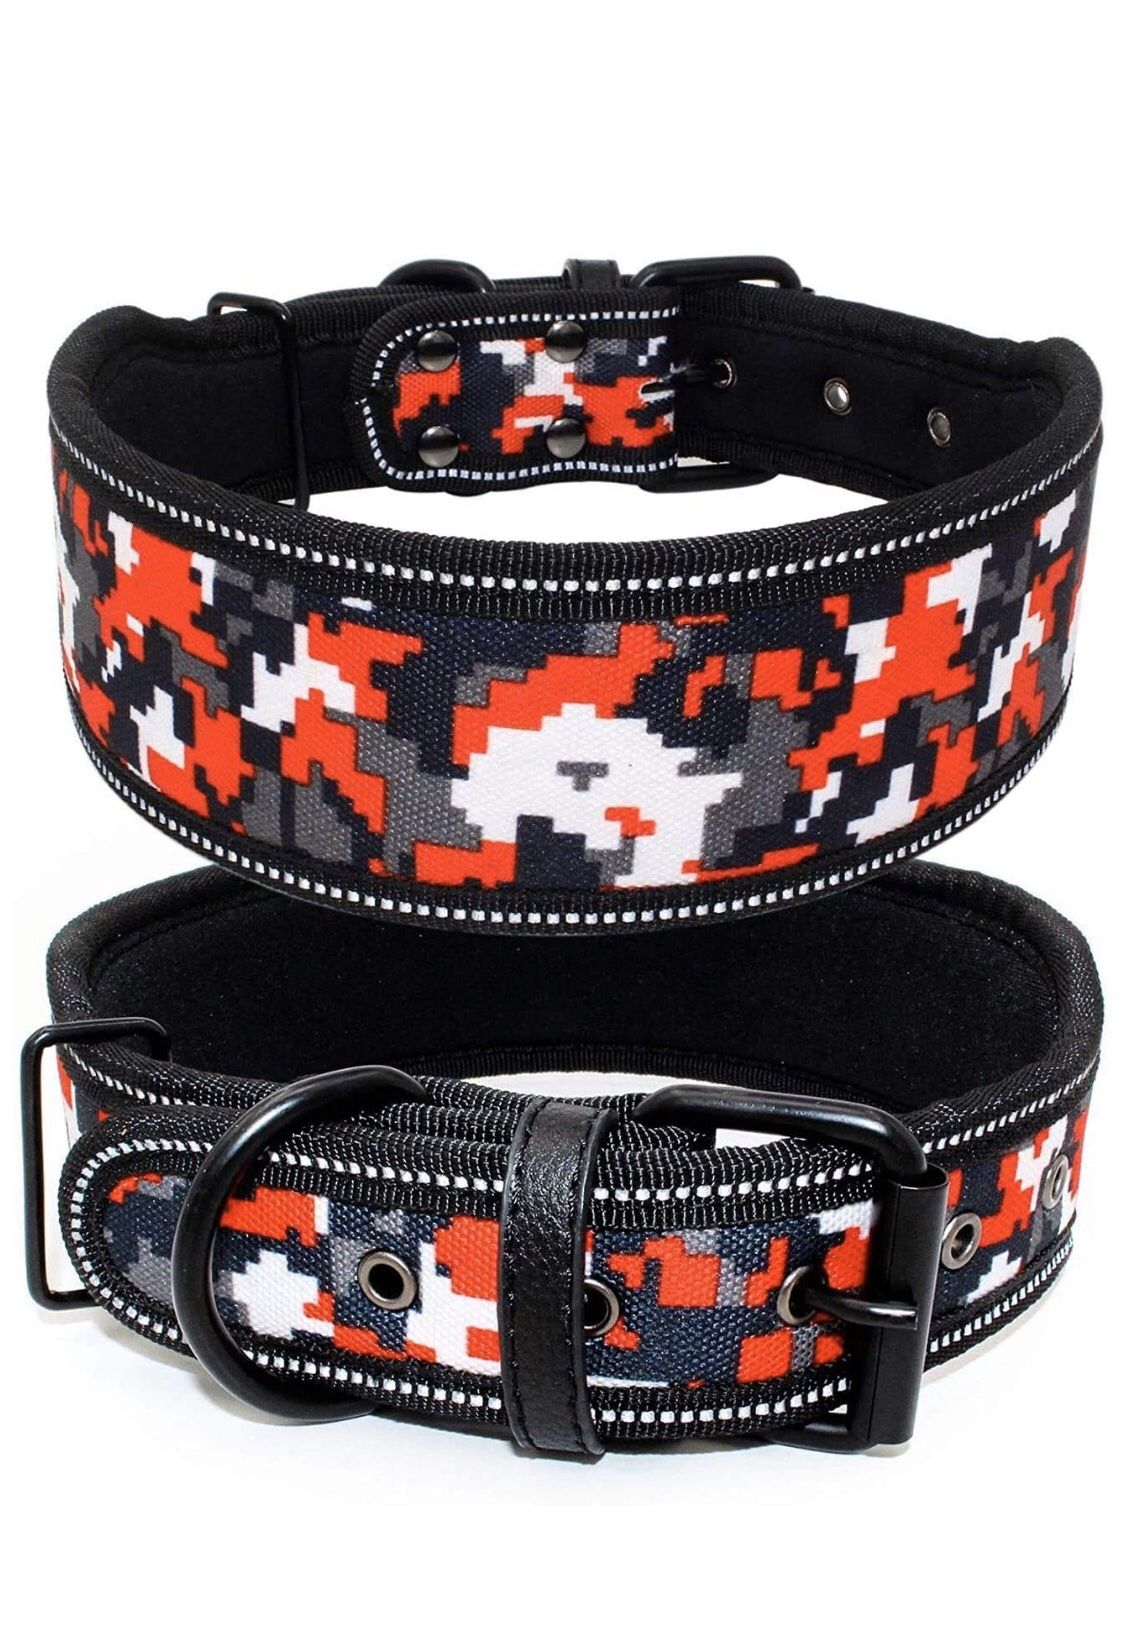 New collar without tags or packaging 2" wide padded dog collar, 20-24" neck size.